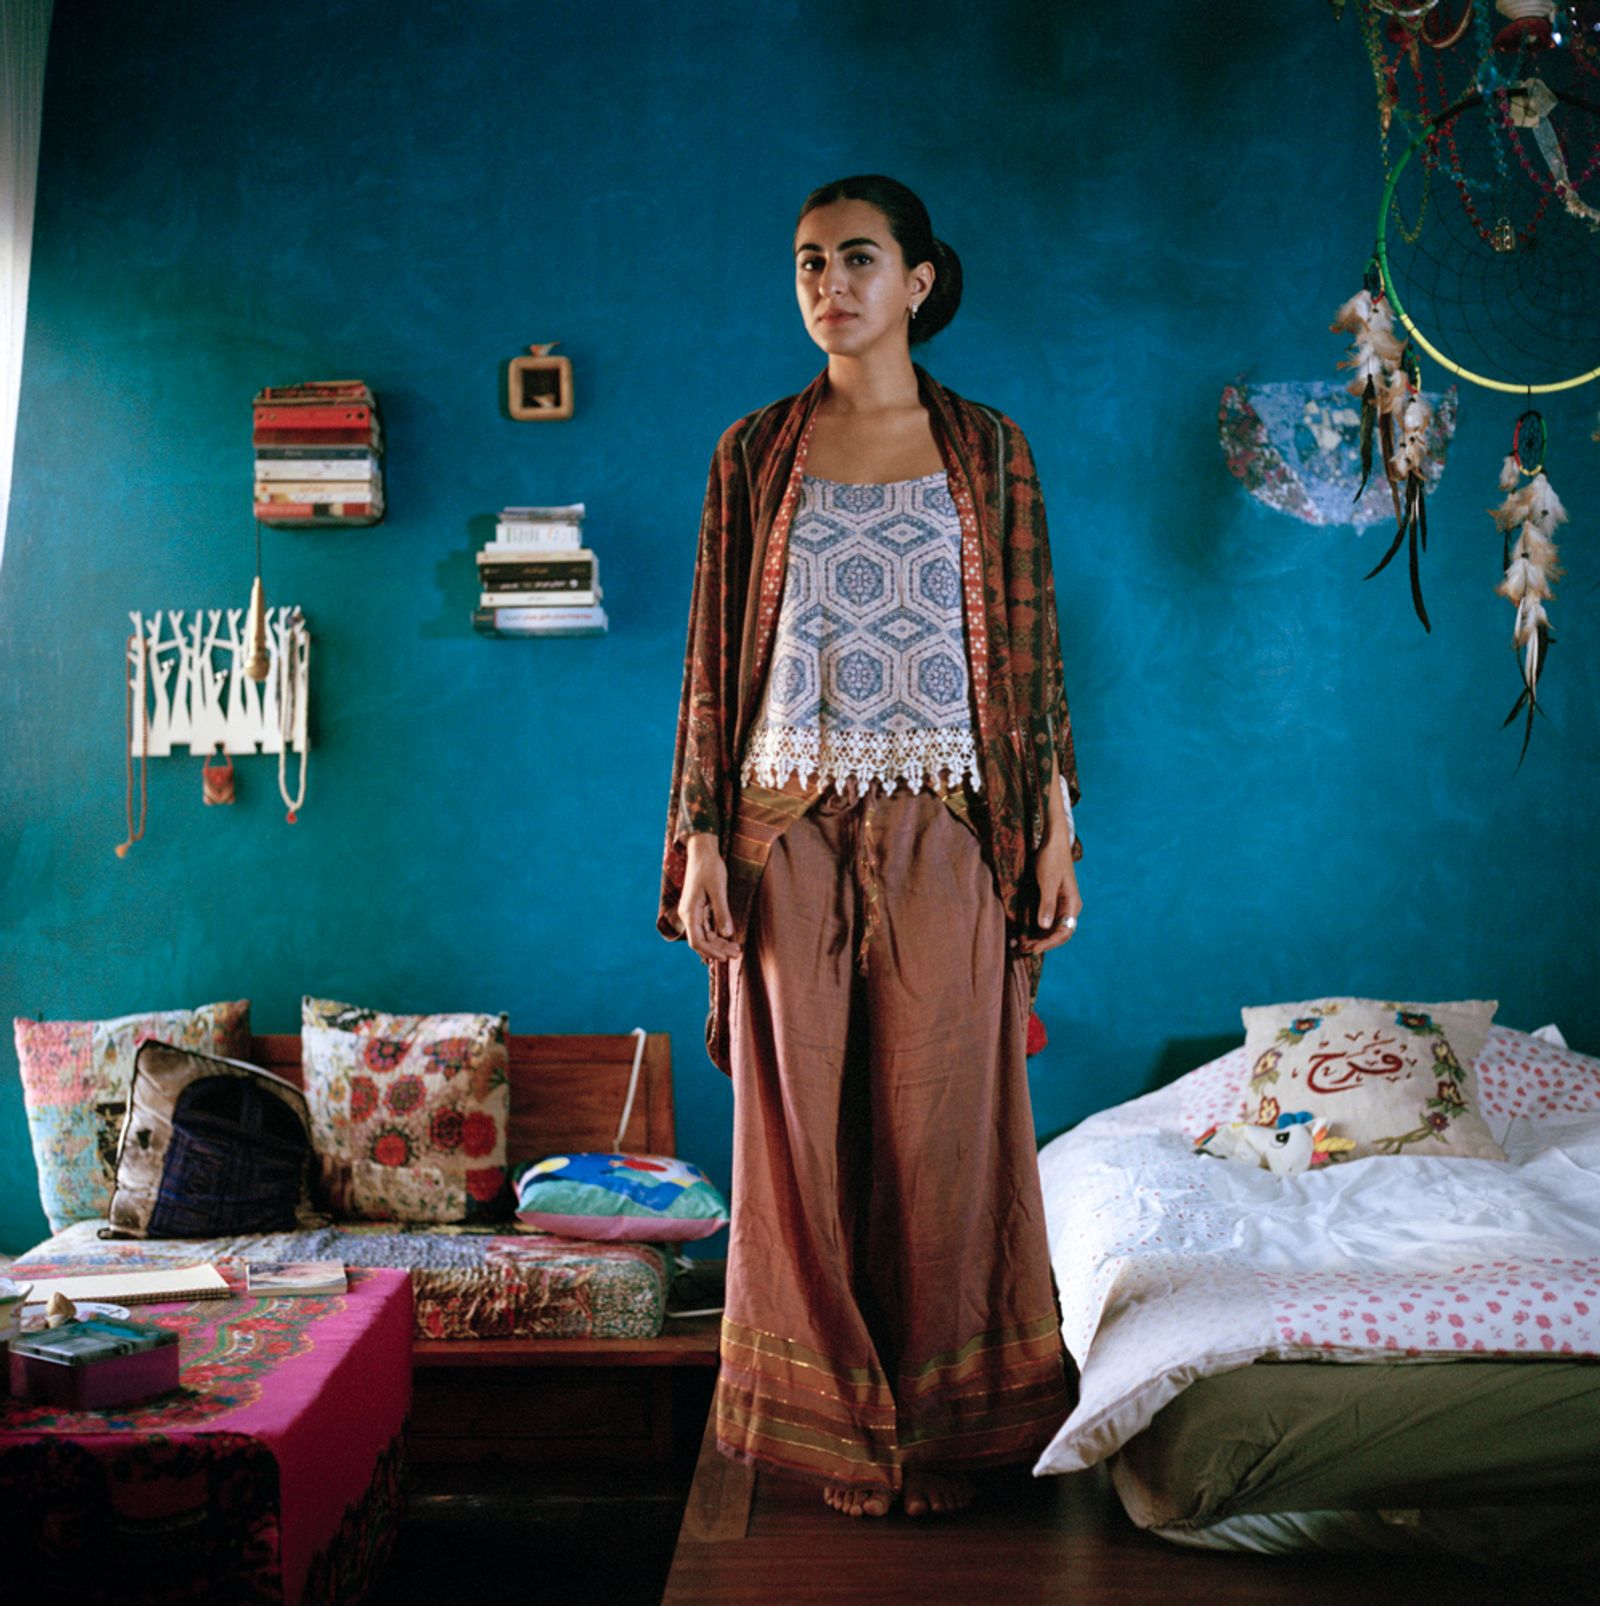 © Maha Alasaker - Image from the Women of kuwait photography project